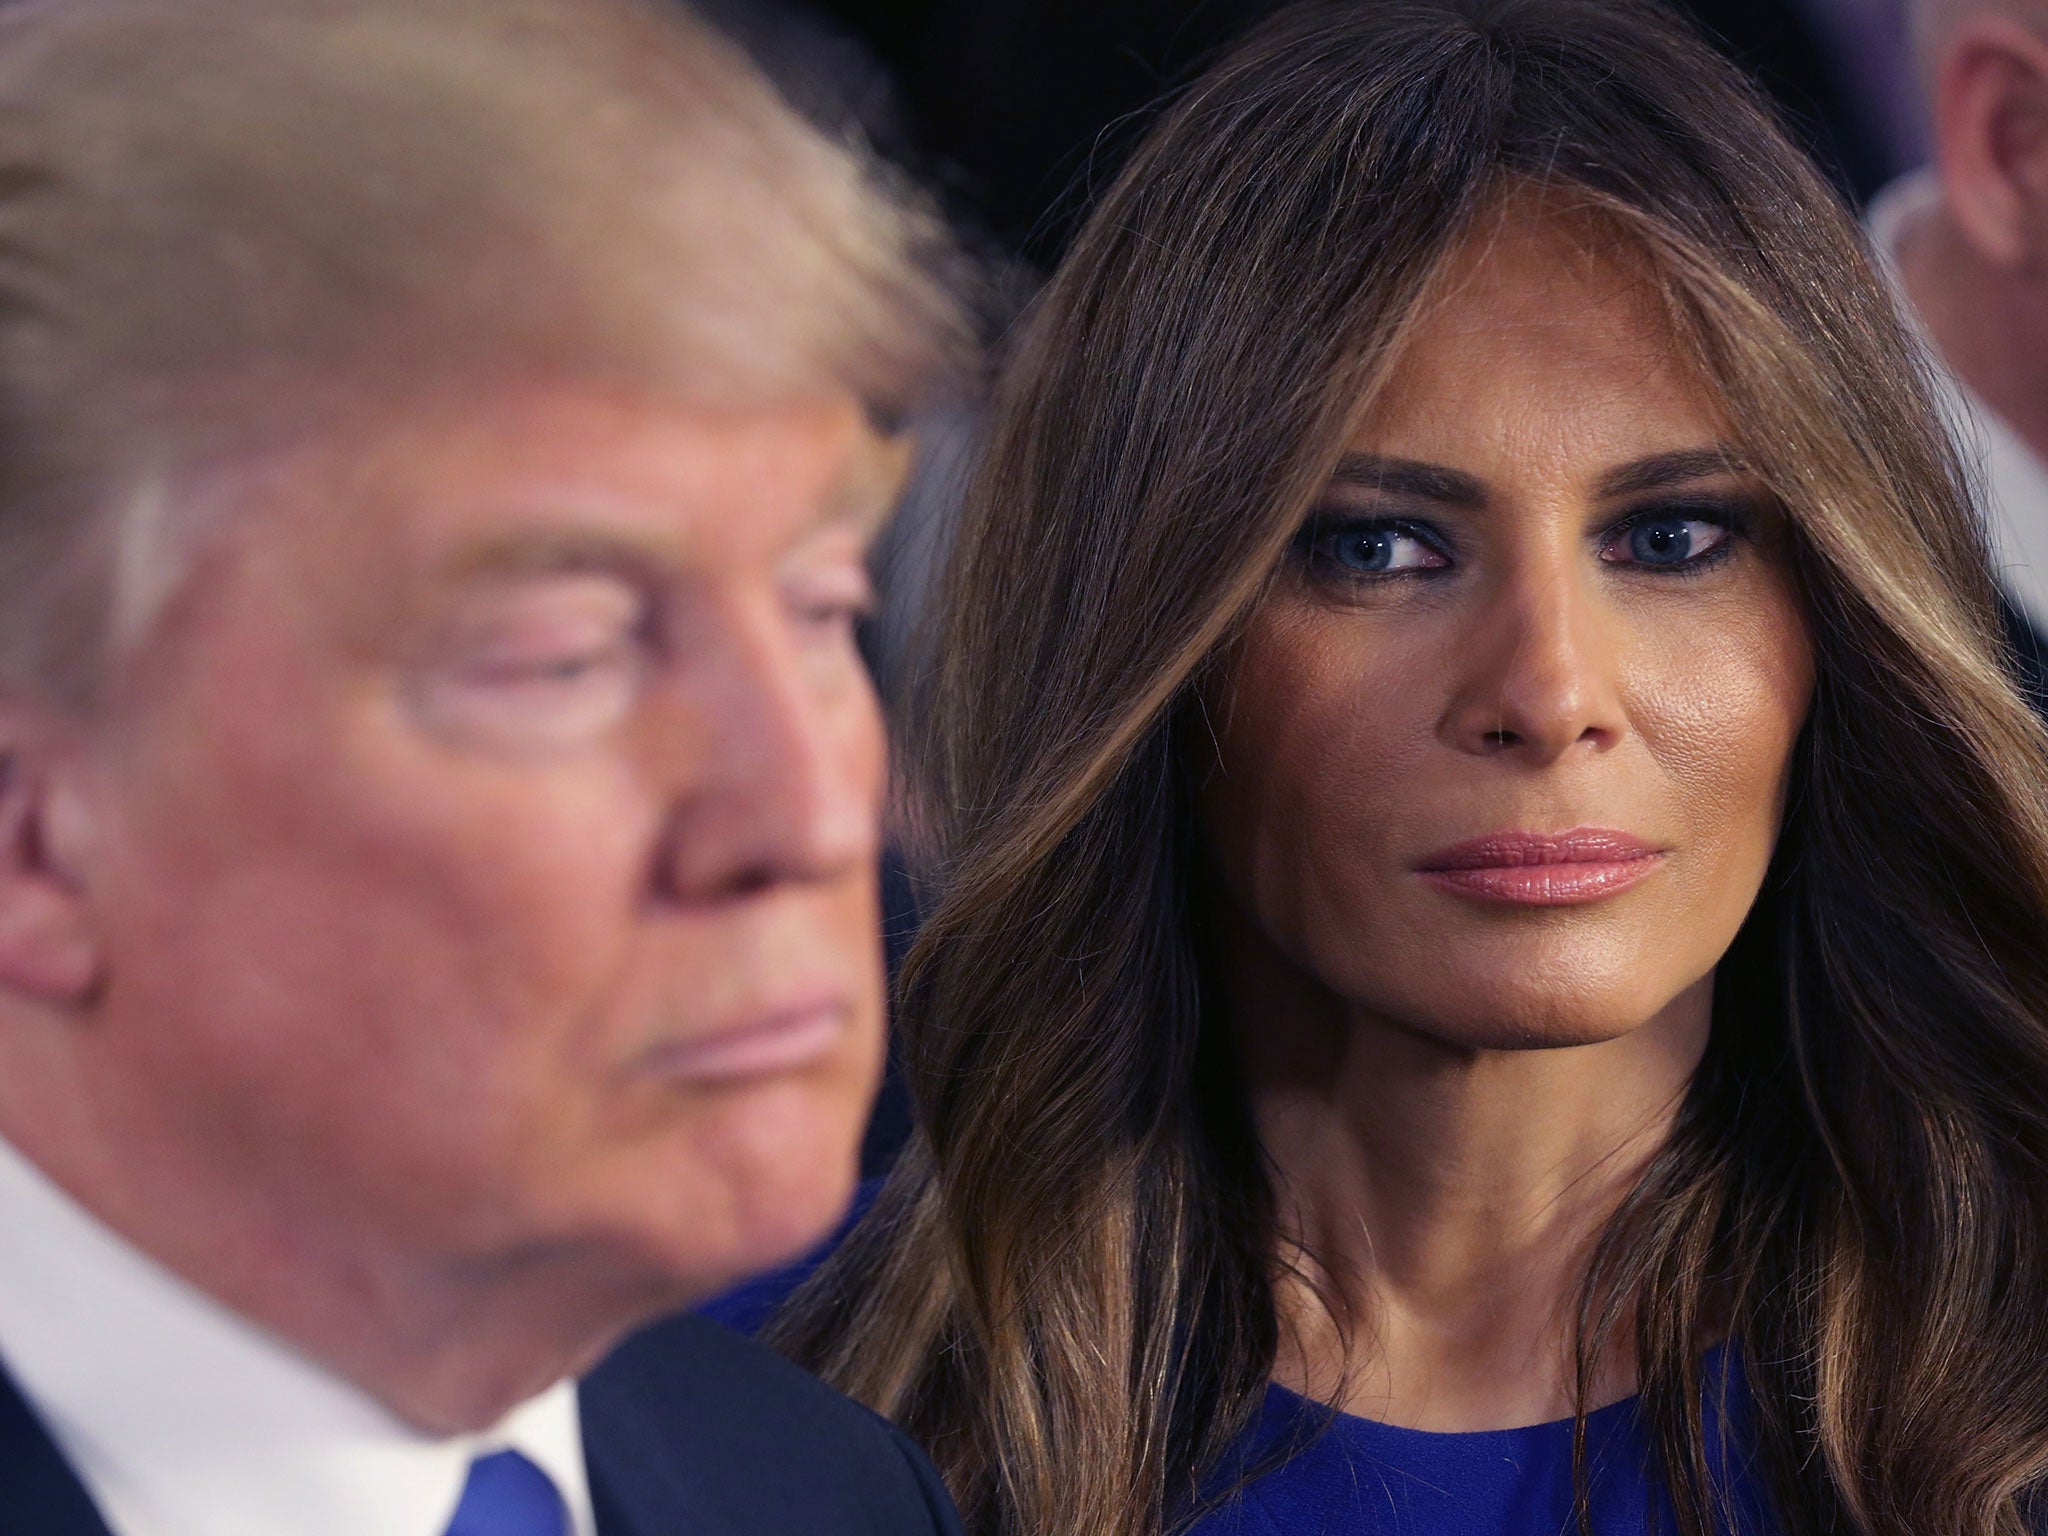 The newspaper admitted one of its journalists 'referred to an unfounded rumour' about the First Lady